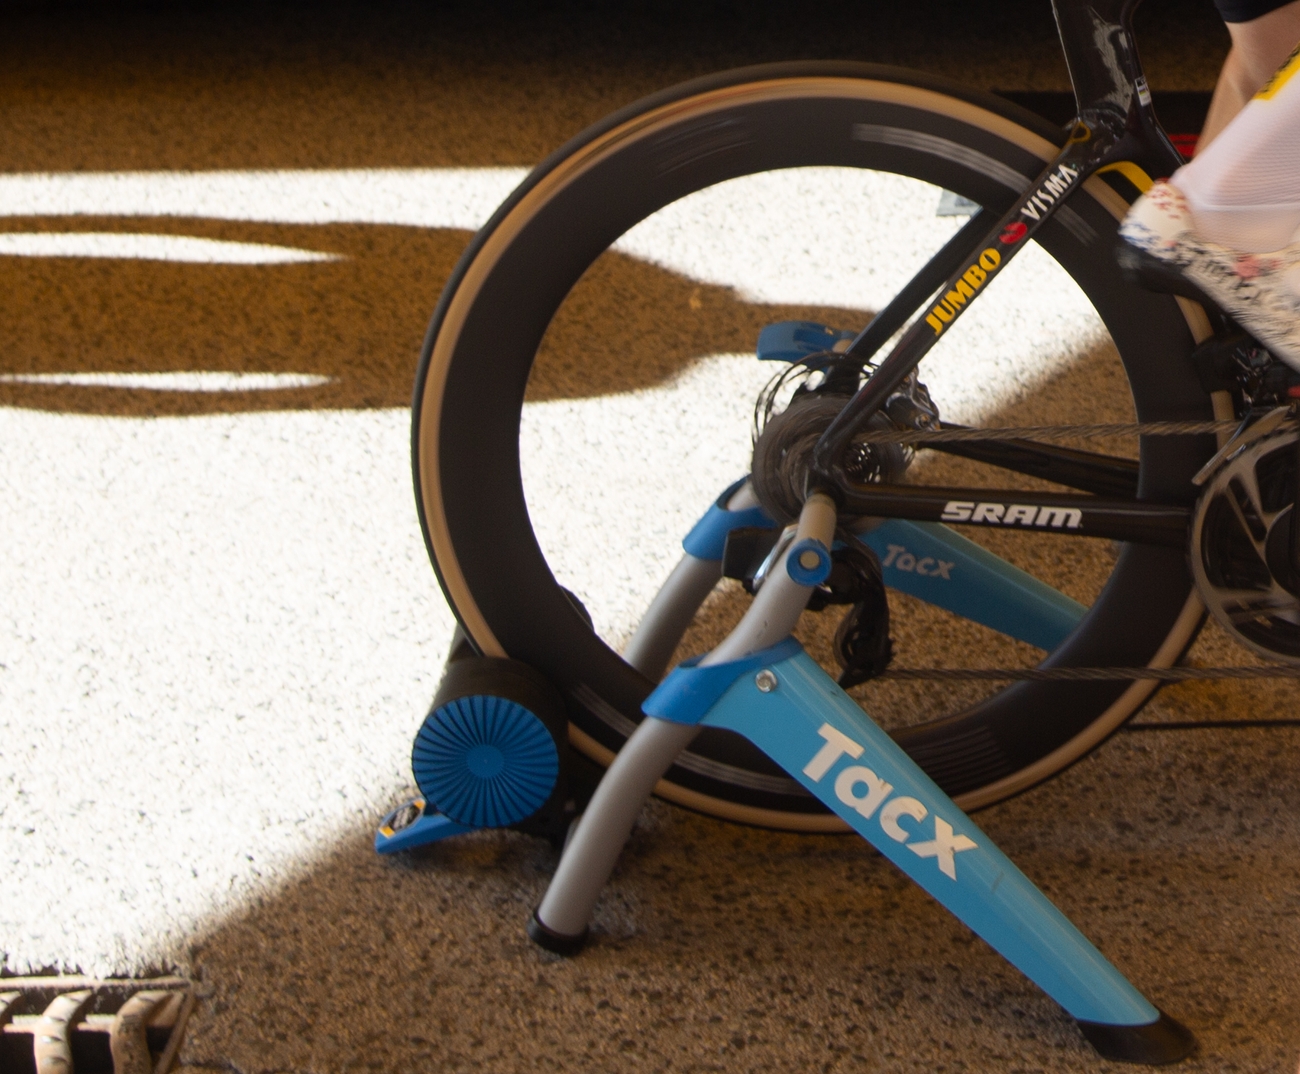 Wheel-on turbo trainers are simple to use